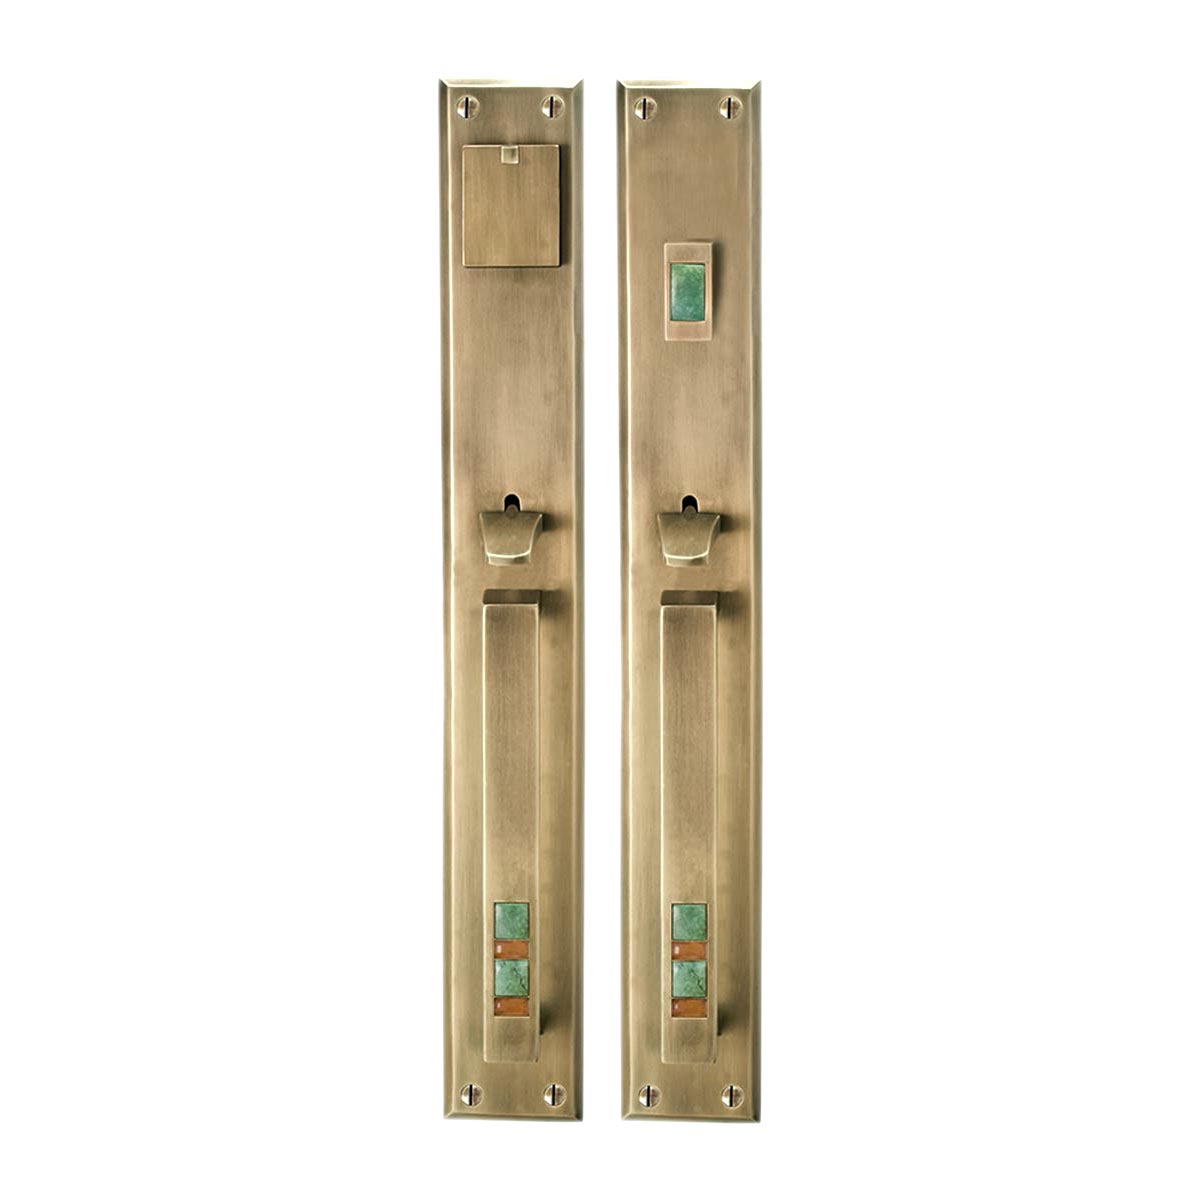 Solid Bronze Scottsdale Royale Thumblatch Mortise Entry Set